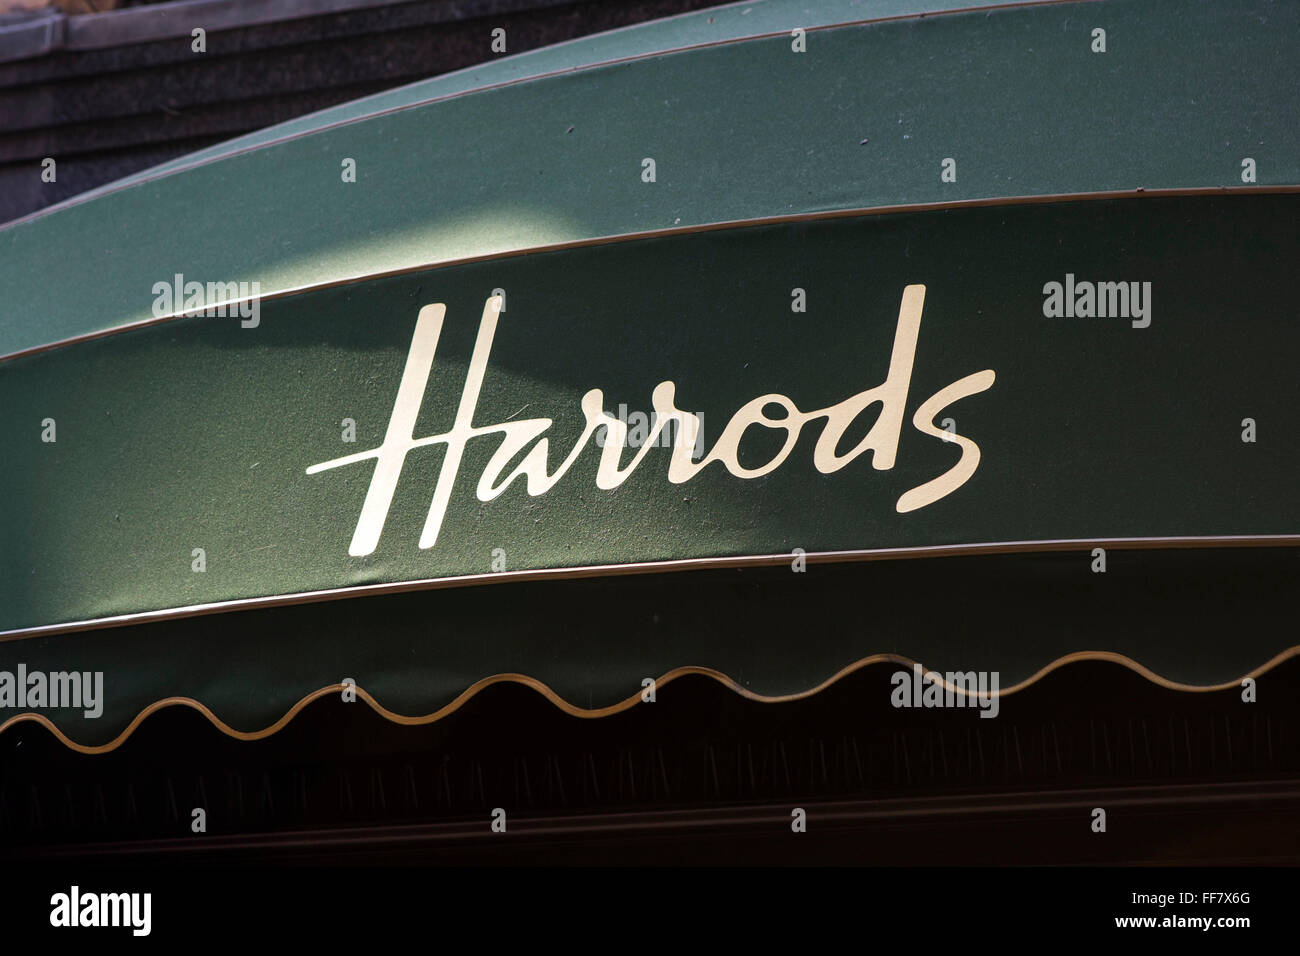 The world famous Harrods logo printed on a green awning over the Harrods department shop window, Knightsbridge, London, United Kingdom. Stock Photo